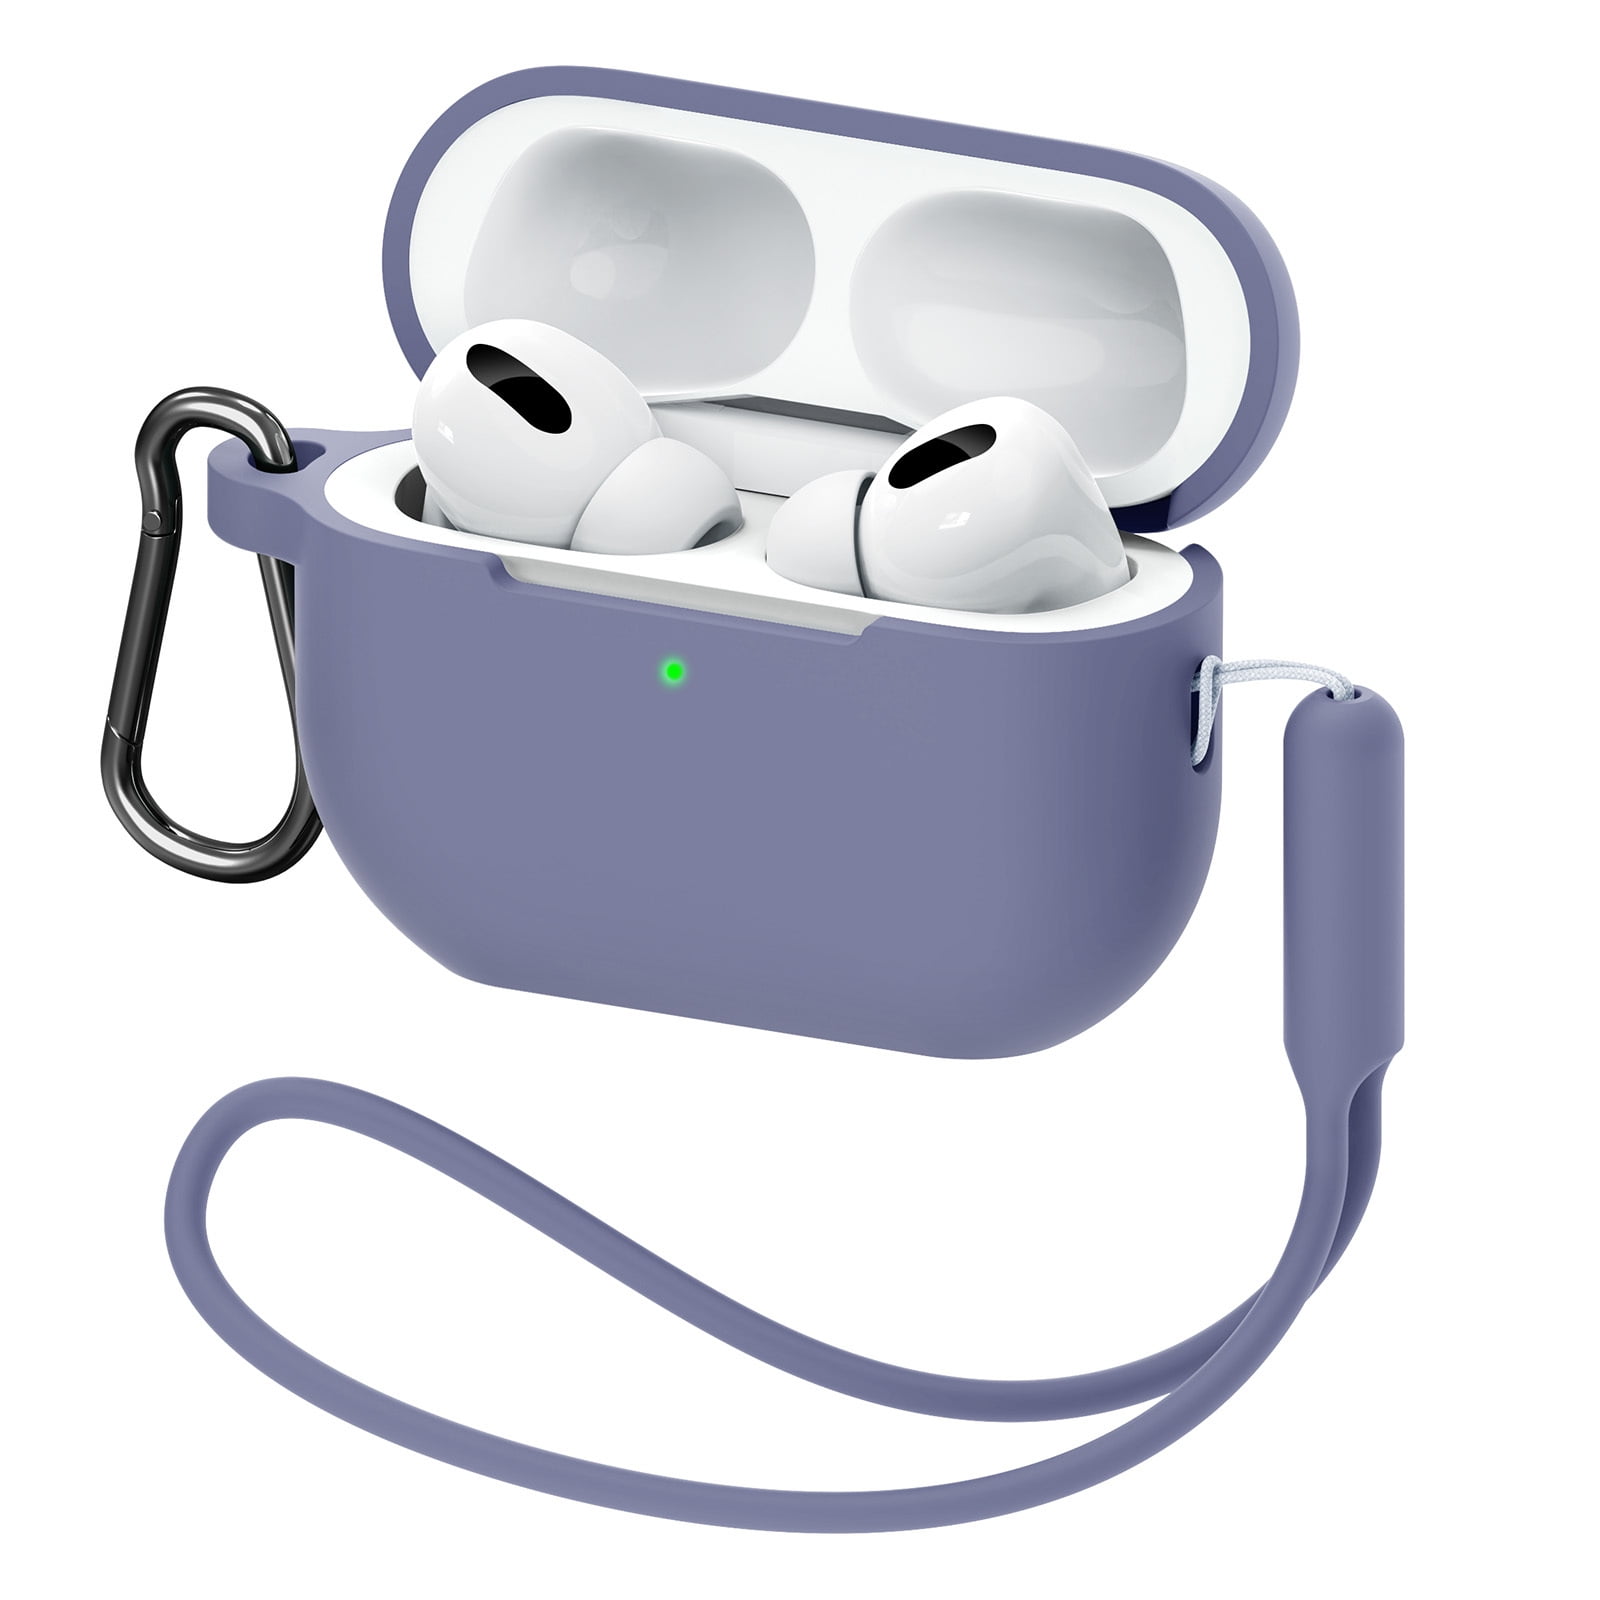 Catalyst releases Essential Case for AirPods Pro 2